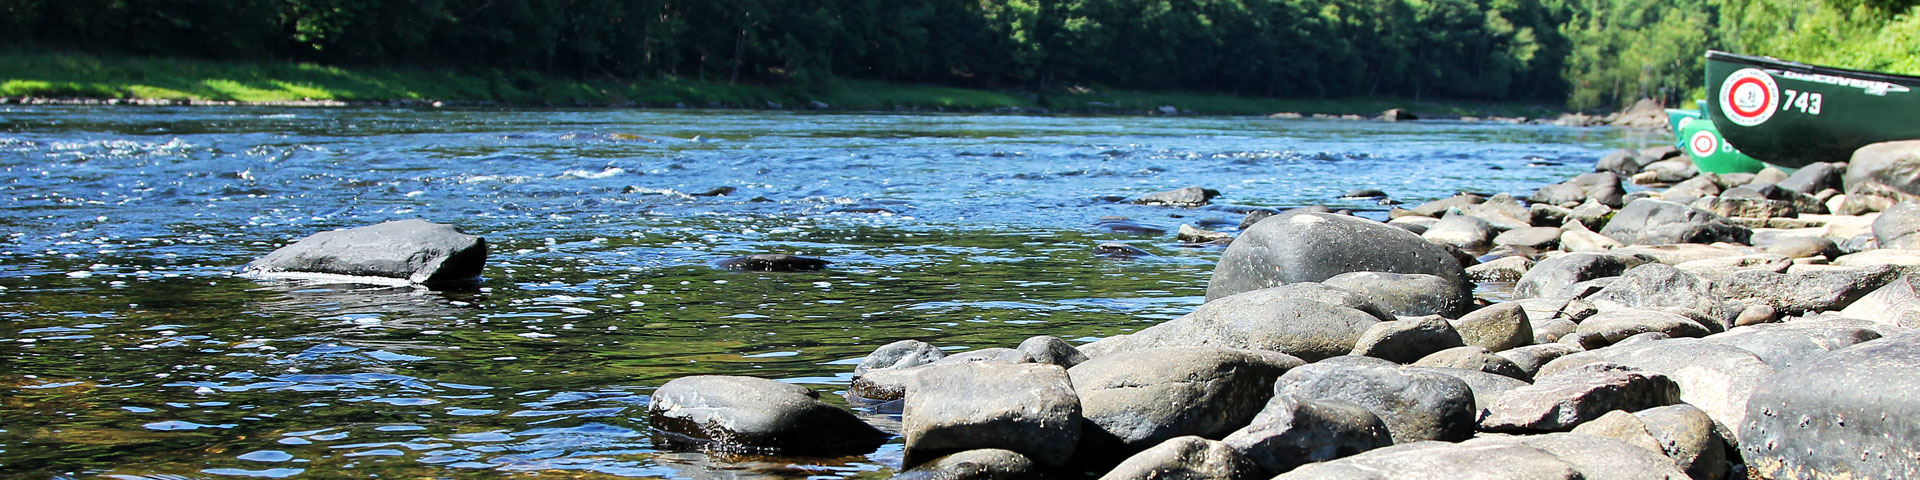 Tips for a Memorable Delaware River Rafting Trip With Your Kids